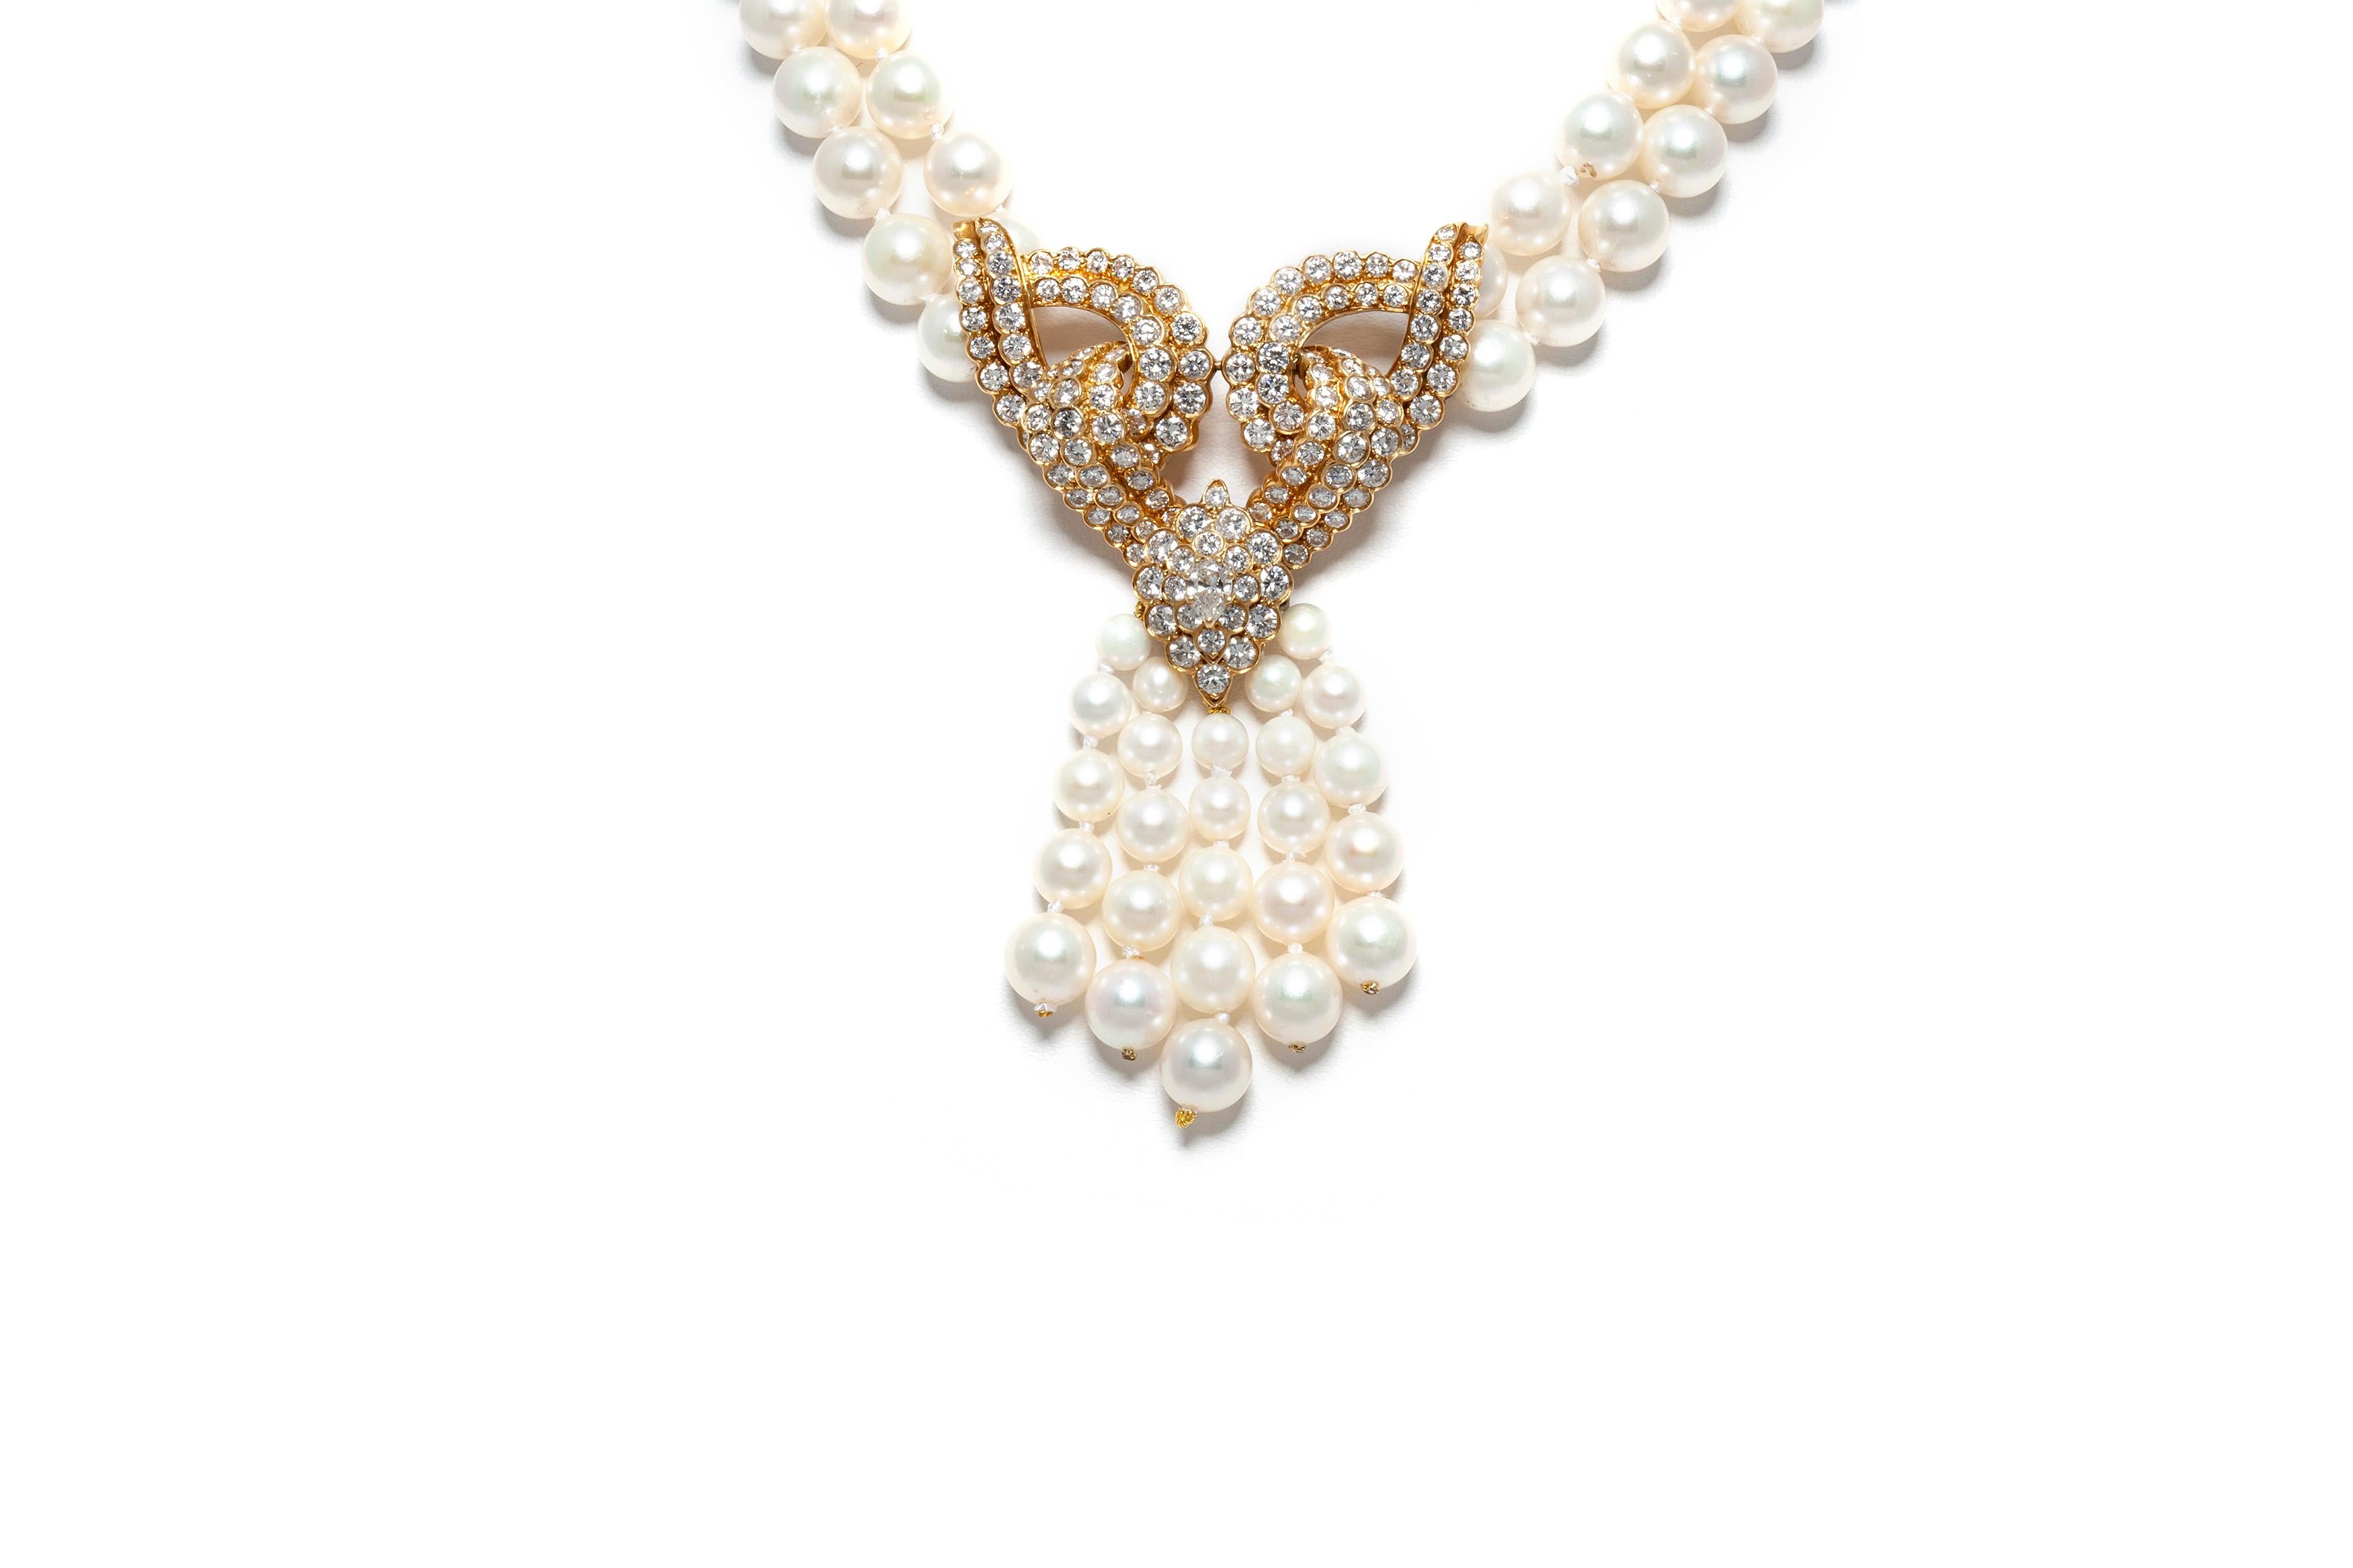 Finely crafted in 18K yellow gold featuring pearls of various sizes and round-cut and pear-shape diamonds weighing a total of 10.00 carats approximately.
14 inches long.